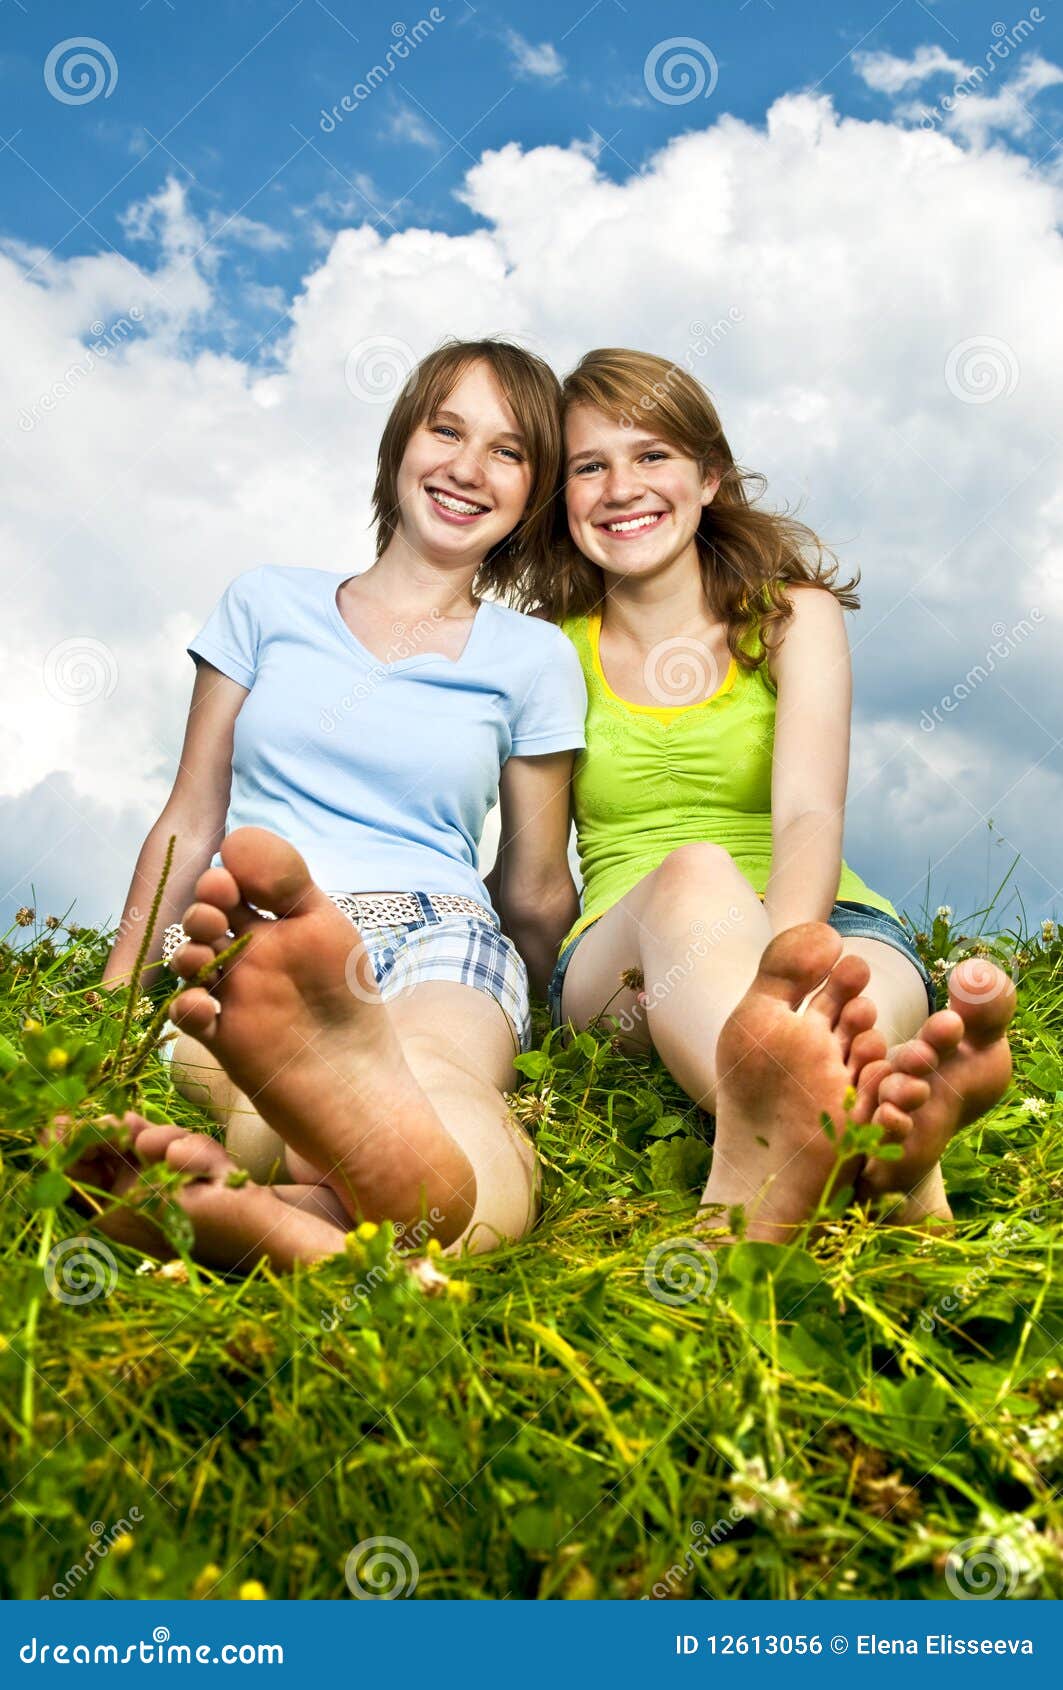 https://thumbs.dreamstime.com/z/young-girls-sitting-meadow-12613056.jpg